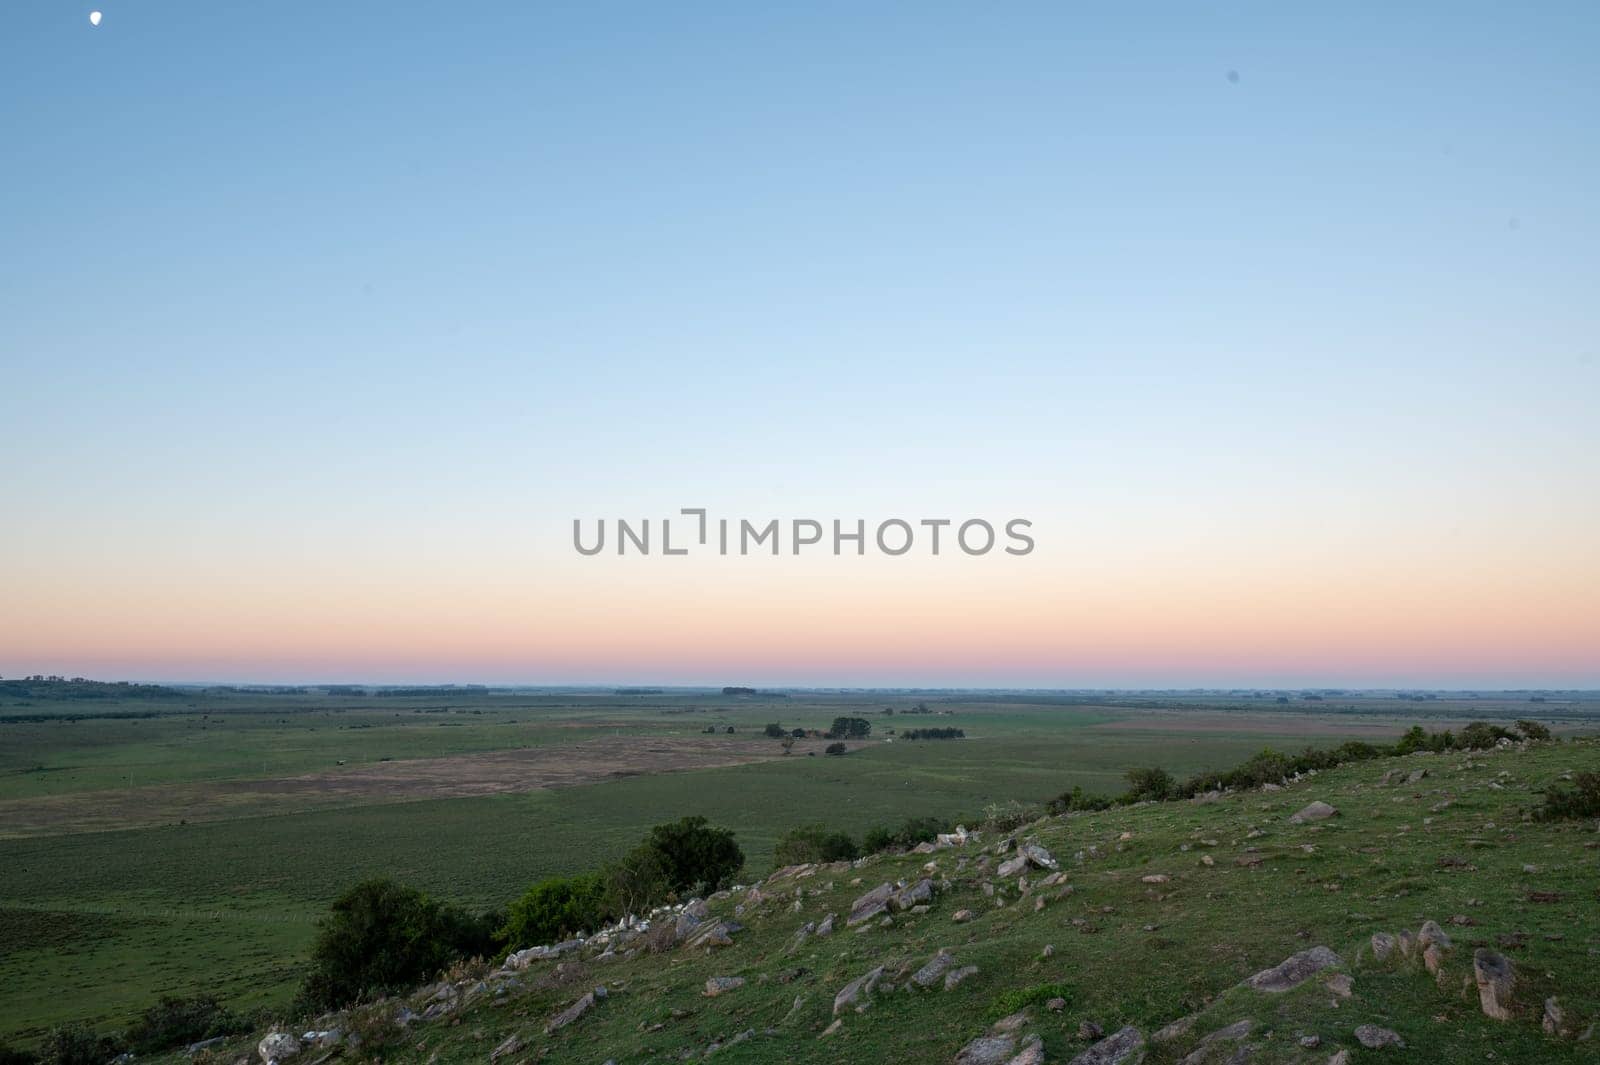 Sunset on sunny day in the countryside of Uruguay. by martinscphoto